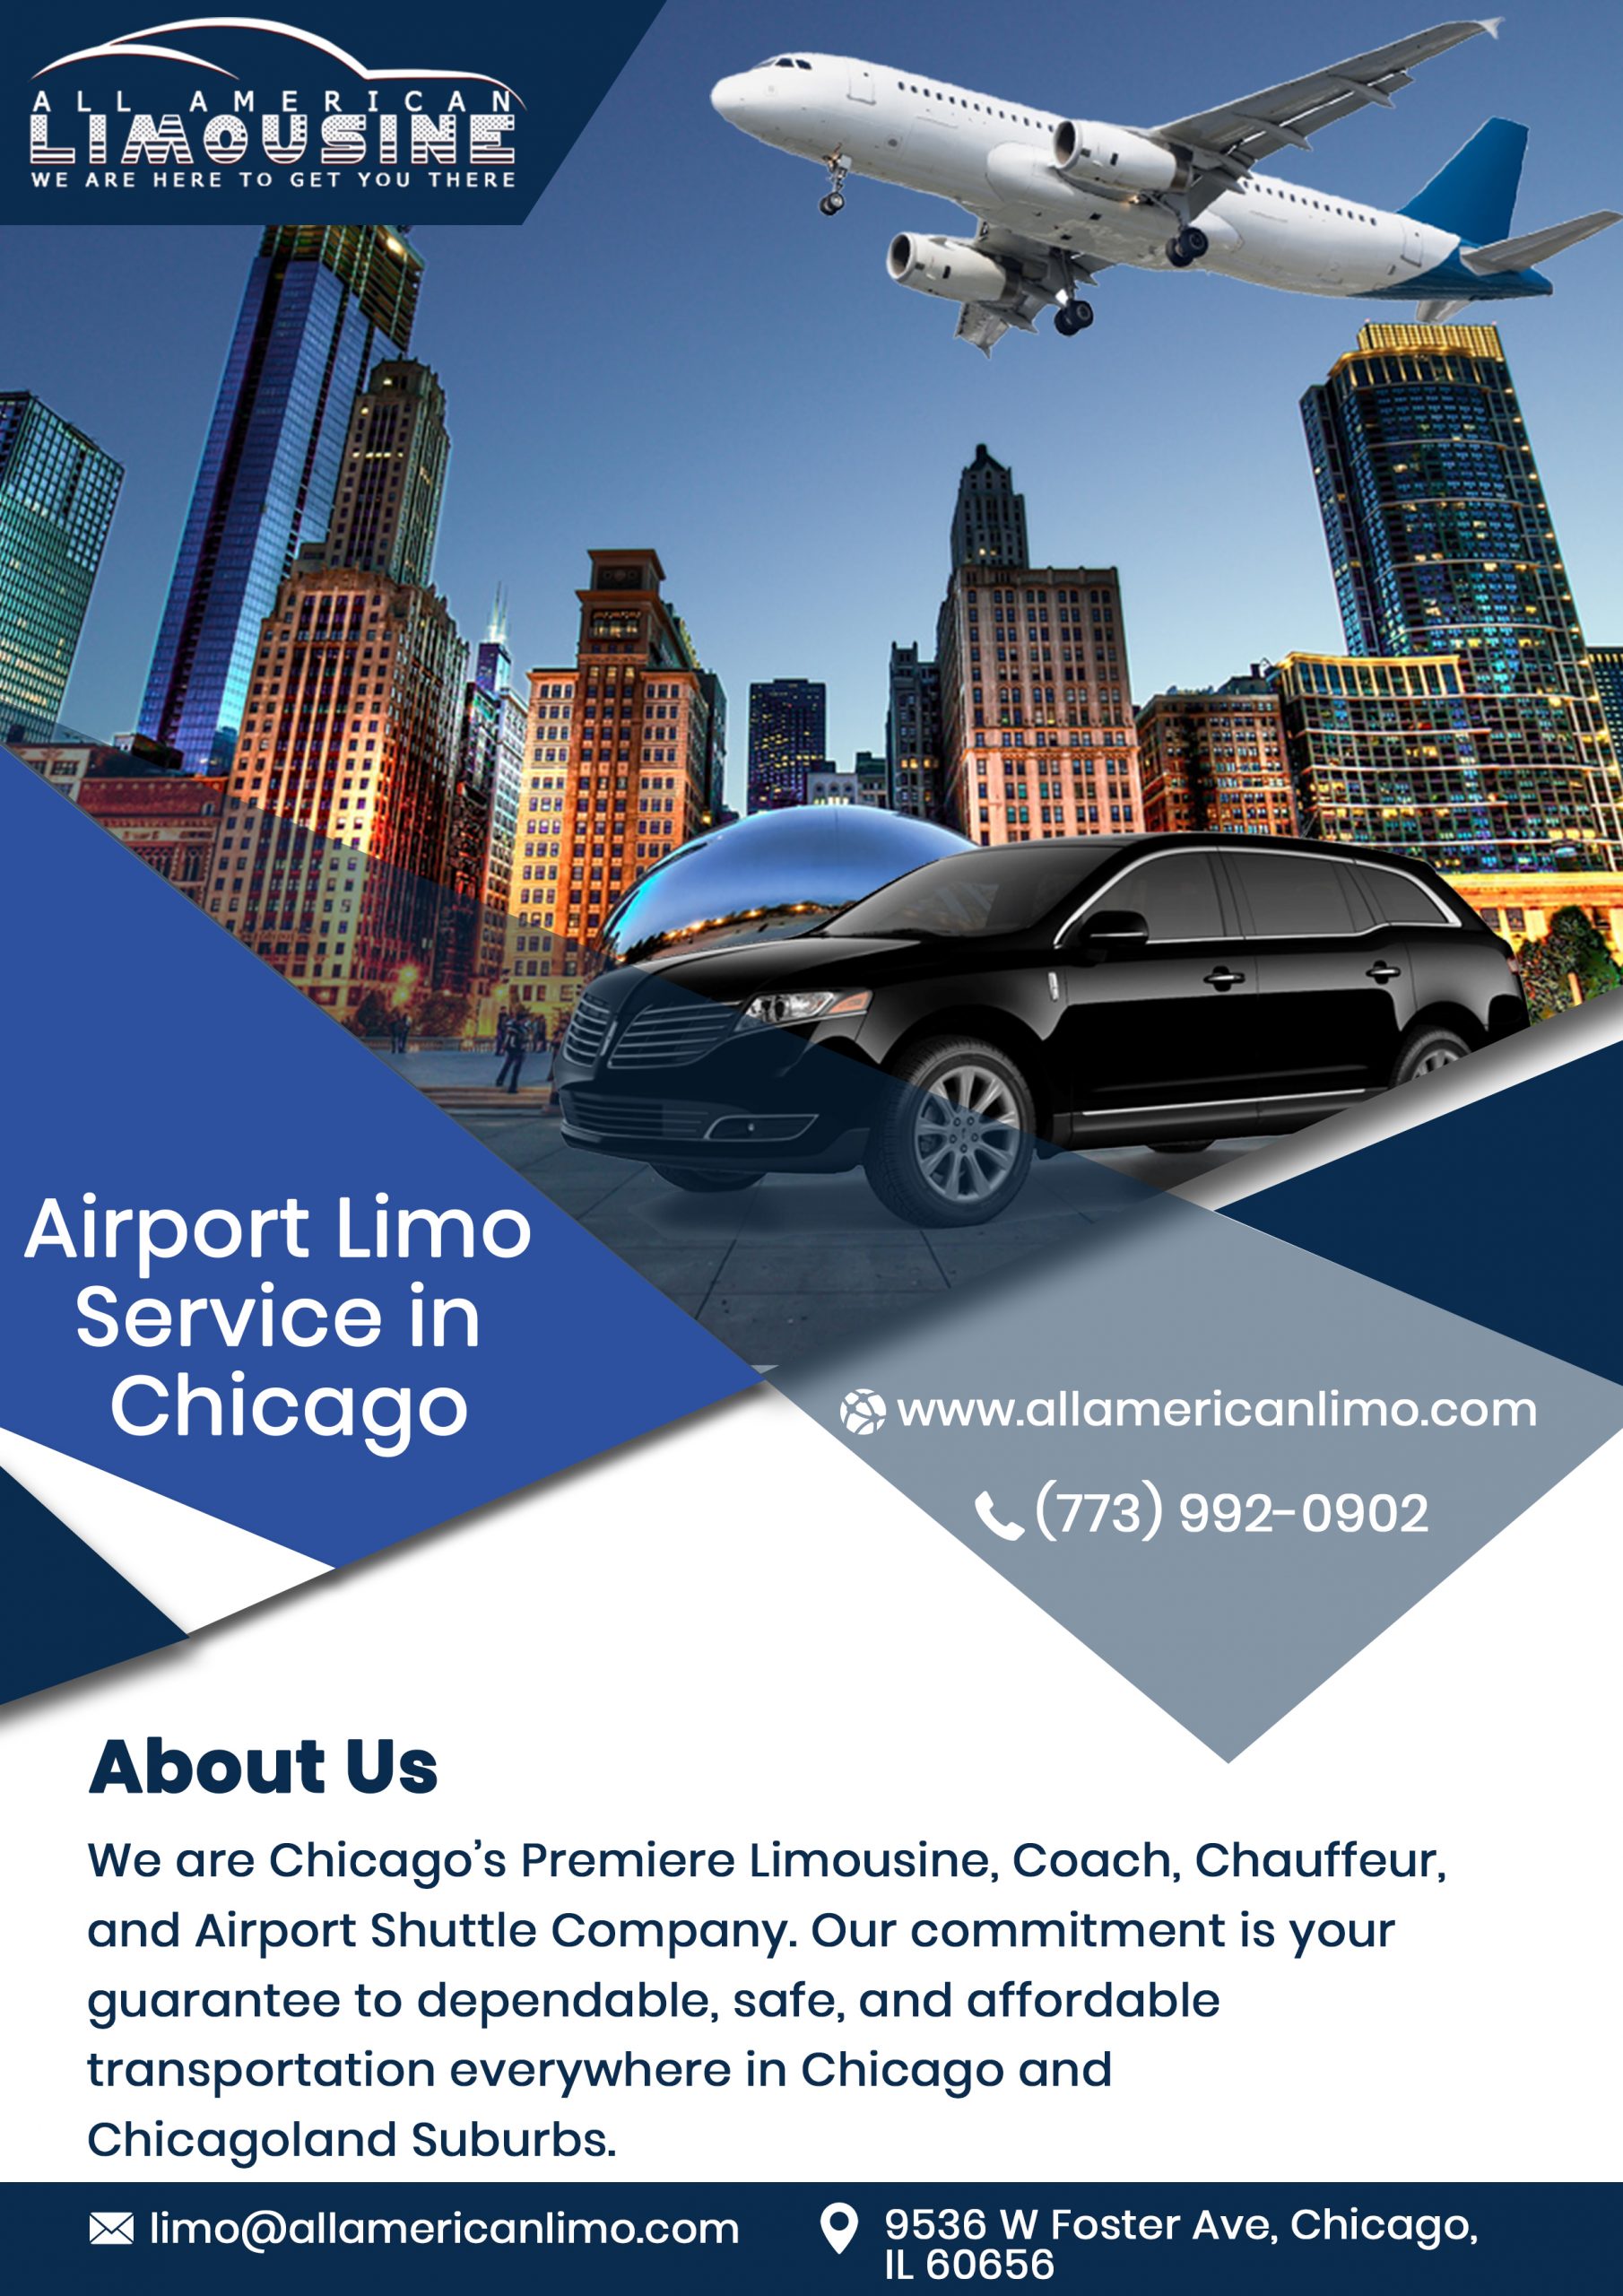 Chicago Car Service Near Me 60623, Party Bus 60623, Mercedes Sprinter Limo to 60623, Chicago Limo 60623, Limo Service 60623 to Airport, Hire, Rent, Get, Find, Car Service 60623 to Airport, Transportation Service 60623 to O'Hare, Corporate Travel 60623, Airport Travel 60623